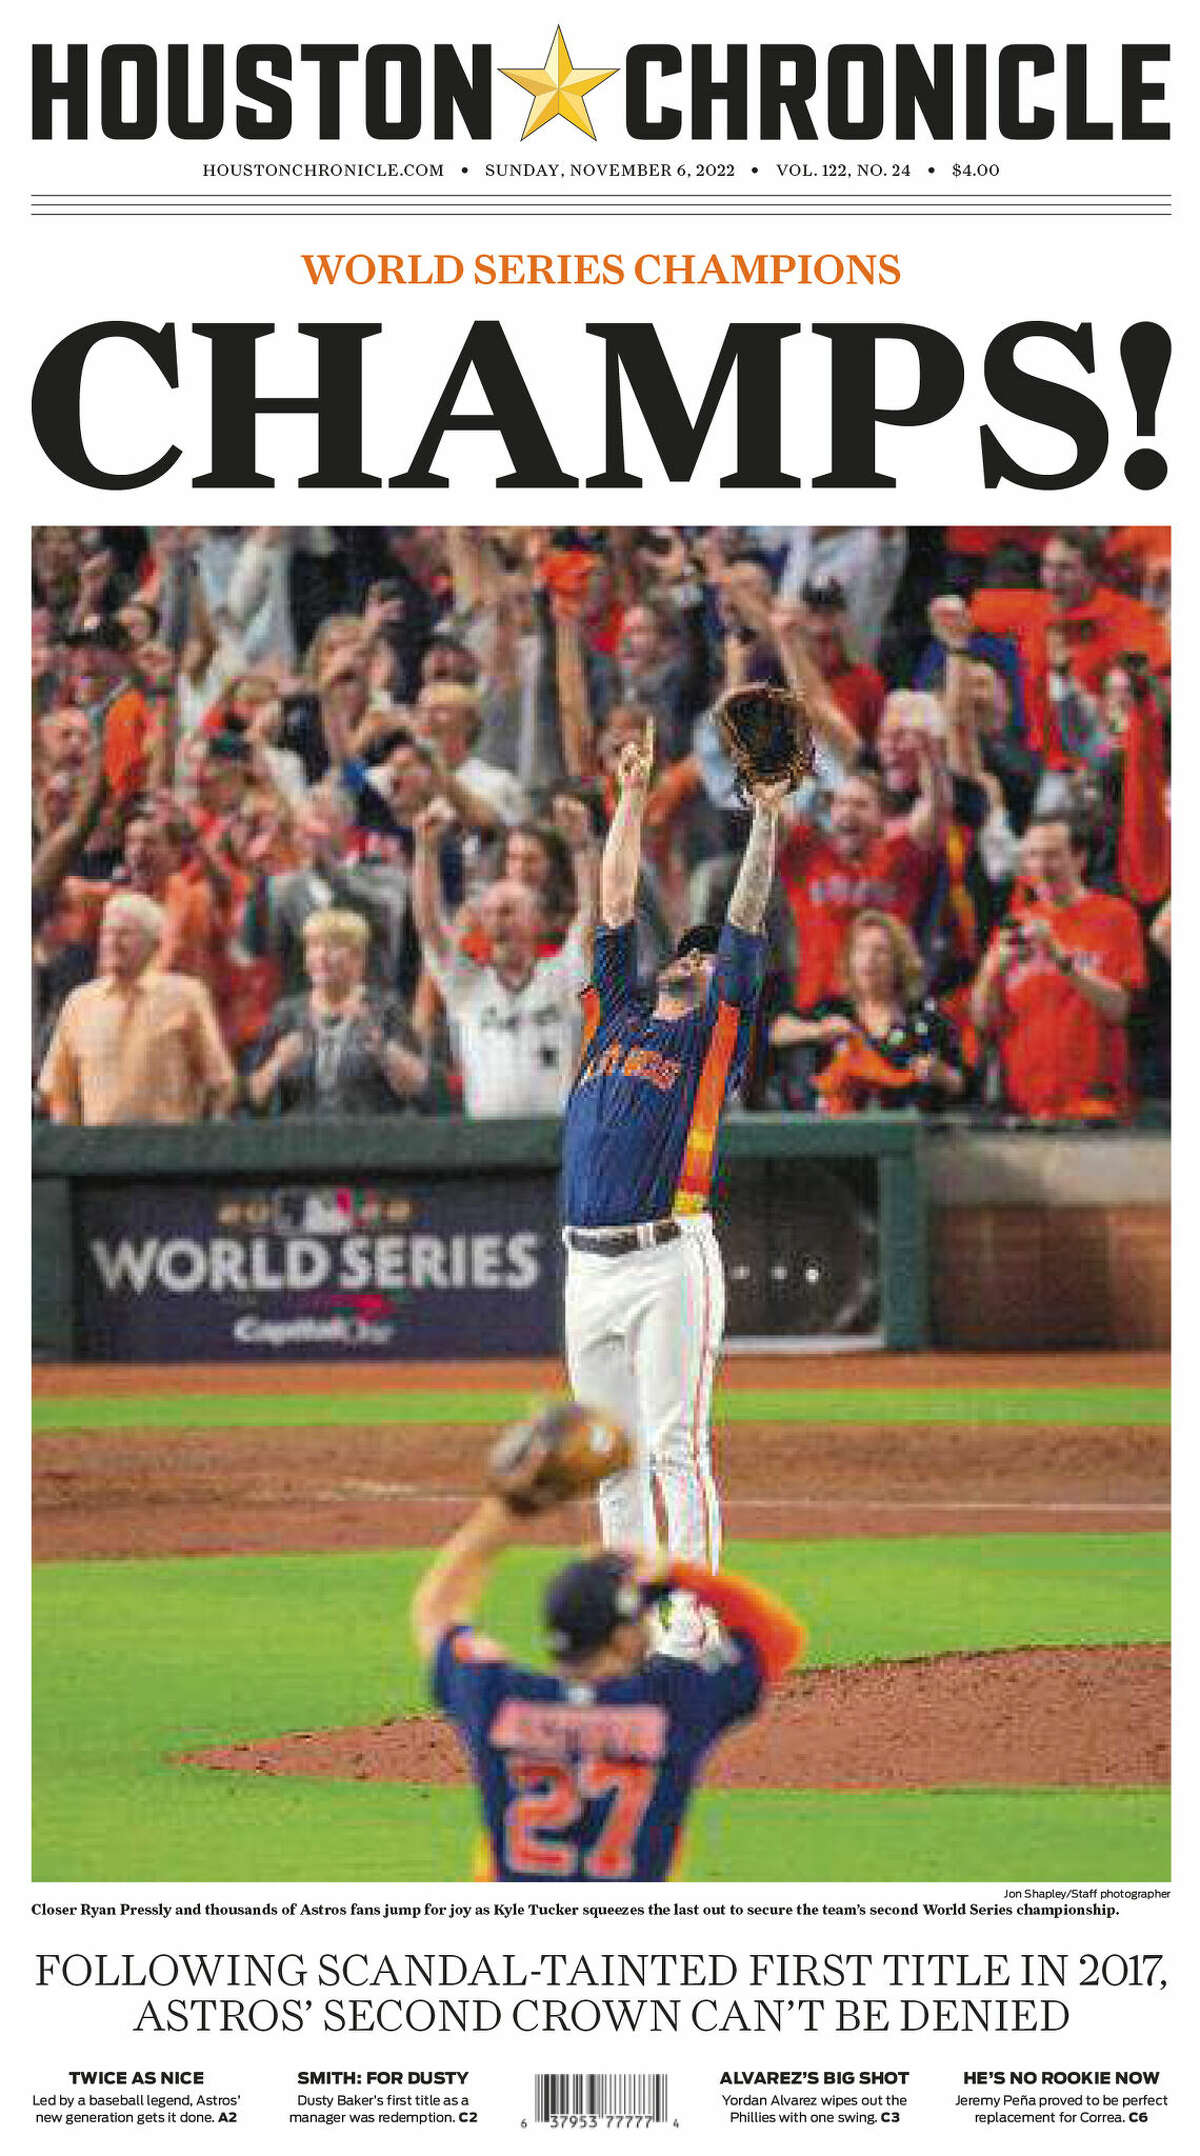 The Astros are back on top of the baseball world after defeating the Phillies in the 2022 World Series.